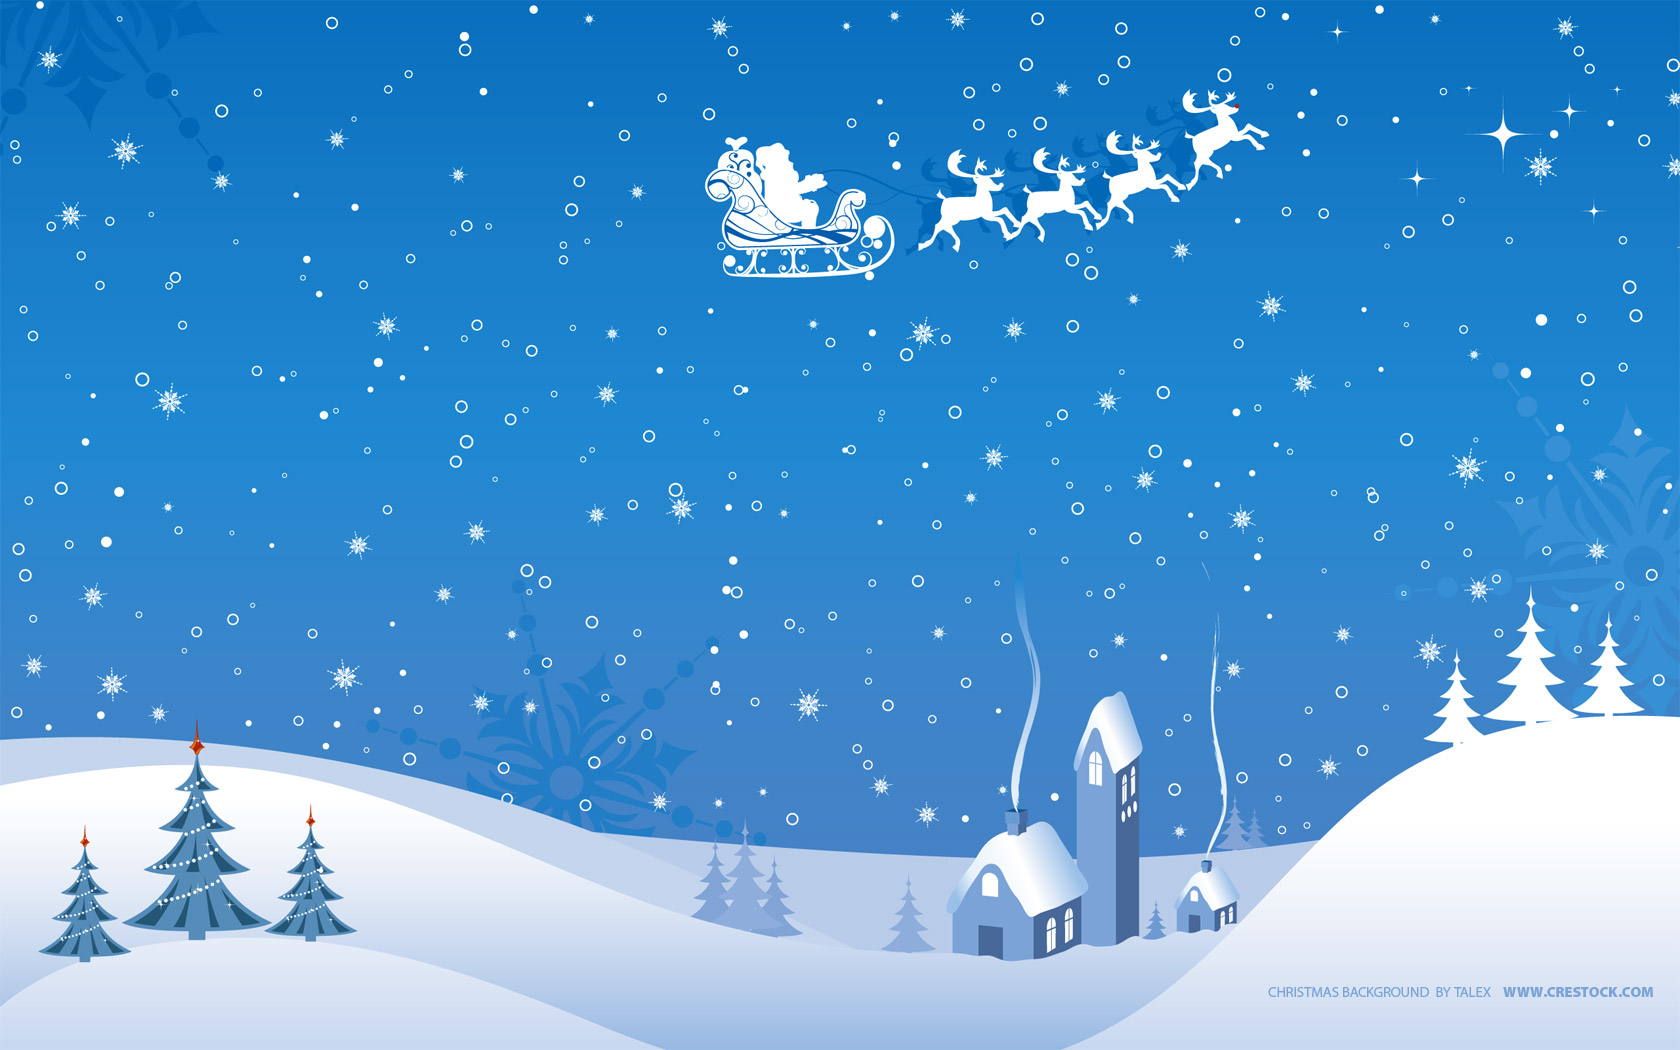 christmas background by talex find similar images christmas